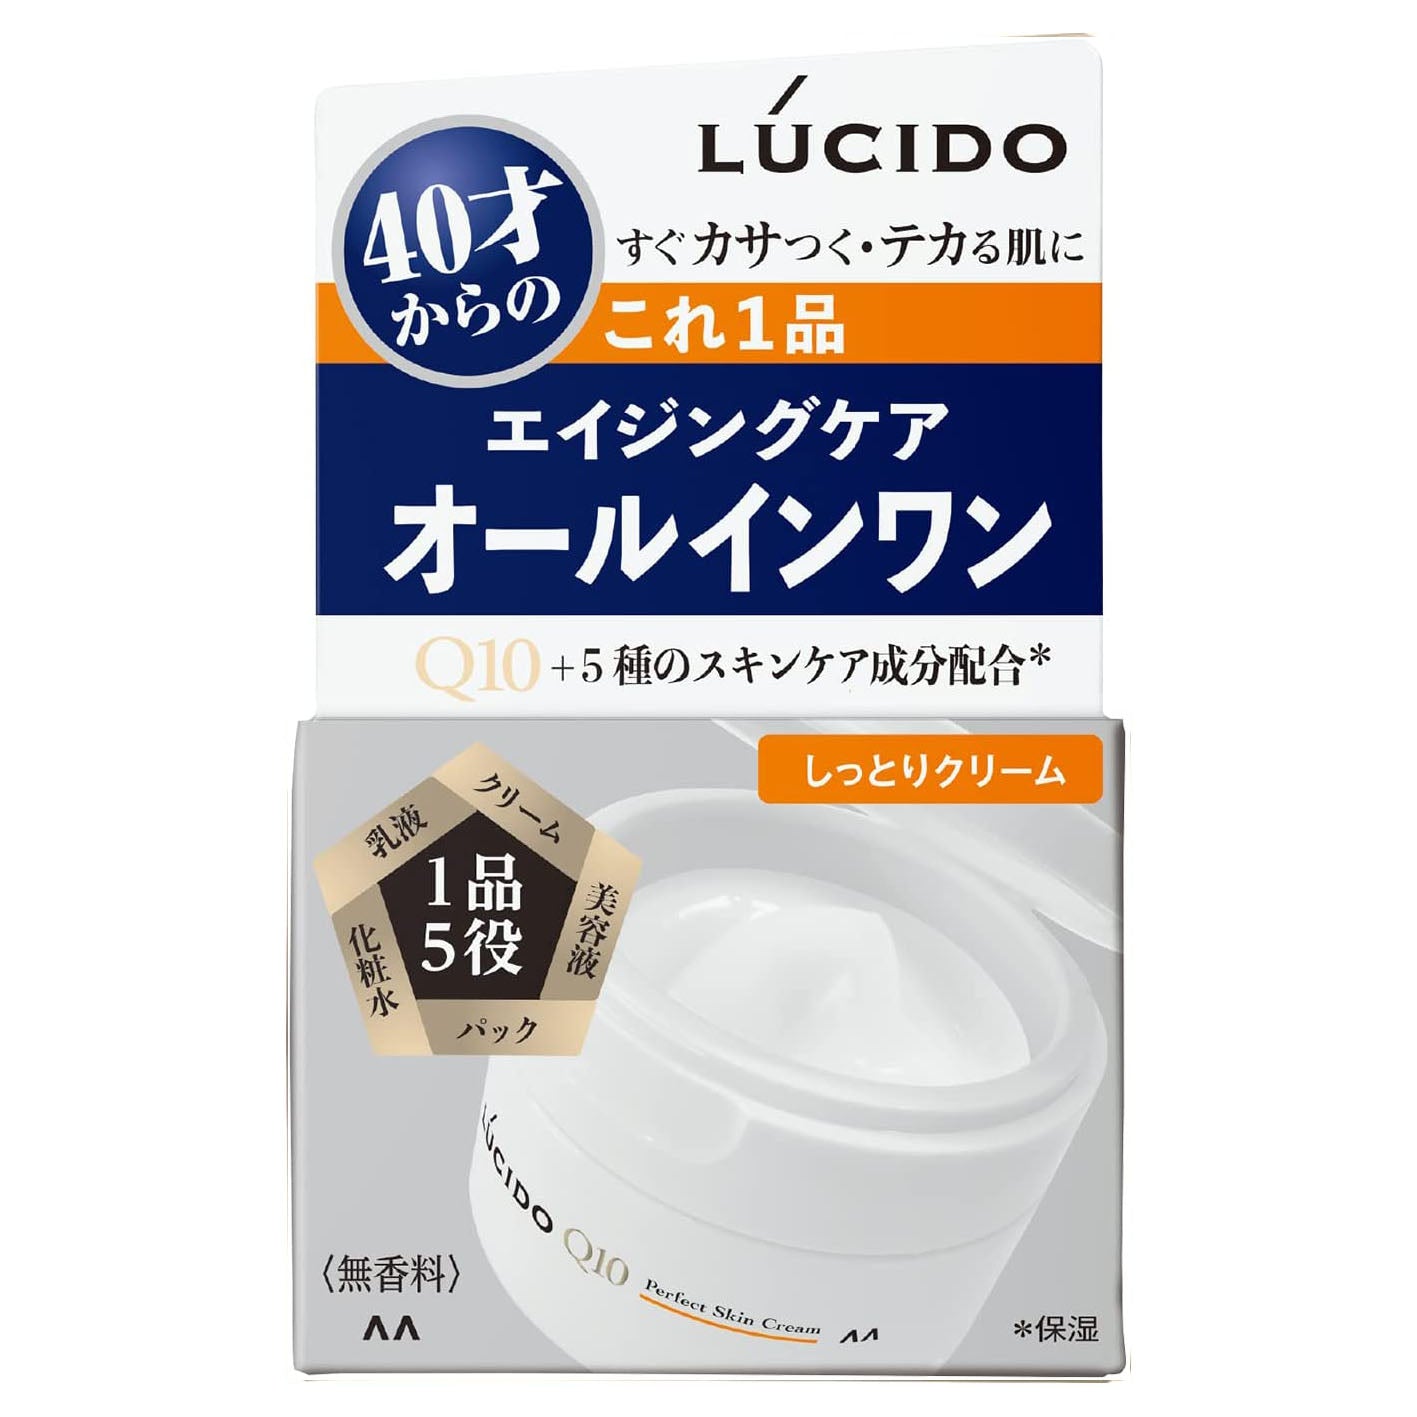 Lucido Perfect Skin Cream 90g - Harajuku Culture Japan - Japanease Products Store Beauty and Stationery